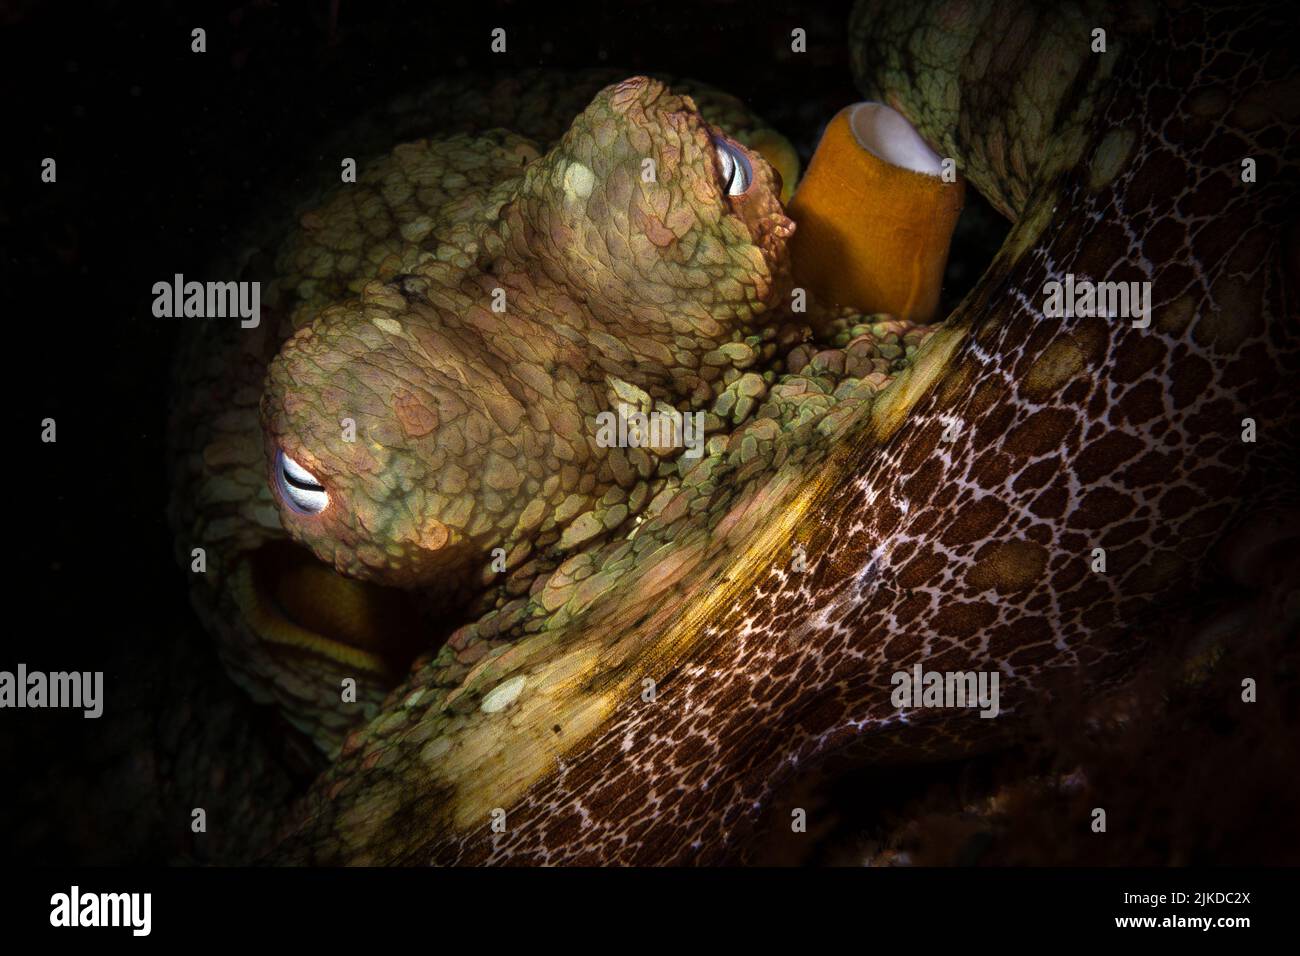 A California octopus sits in a crevice, allowing me to light its eyes with a light snoot. Stock Photo